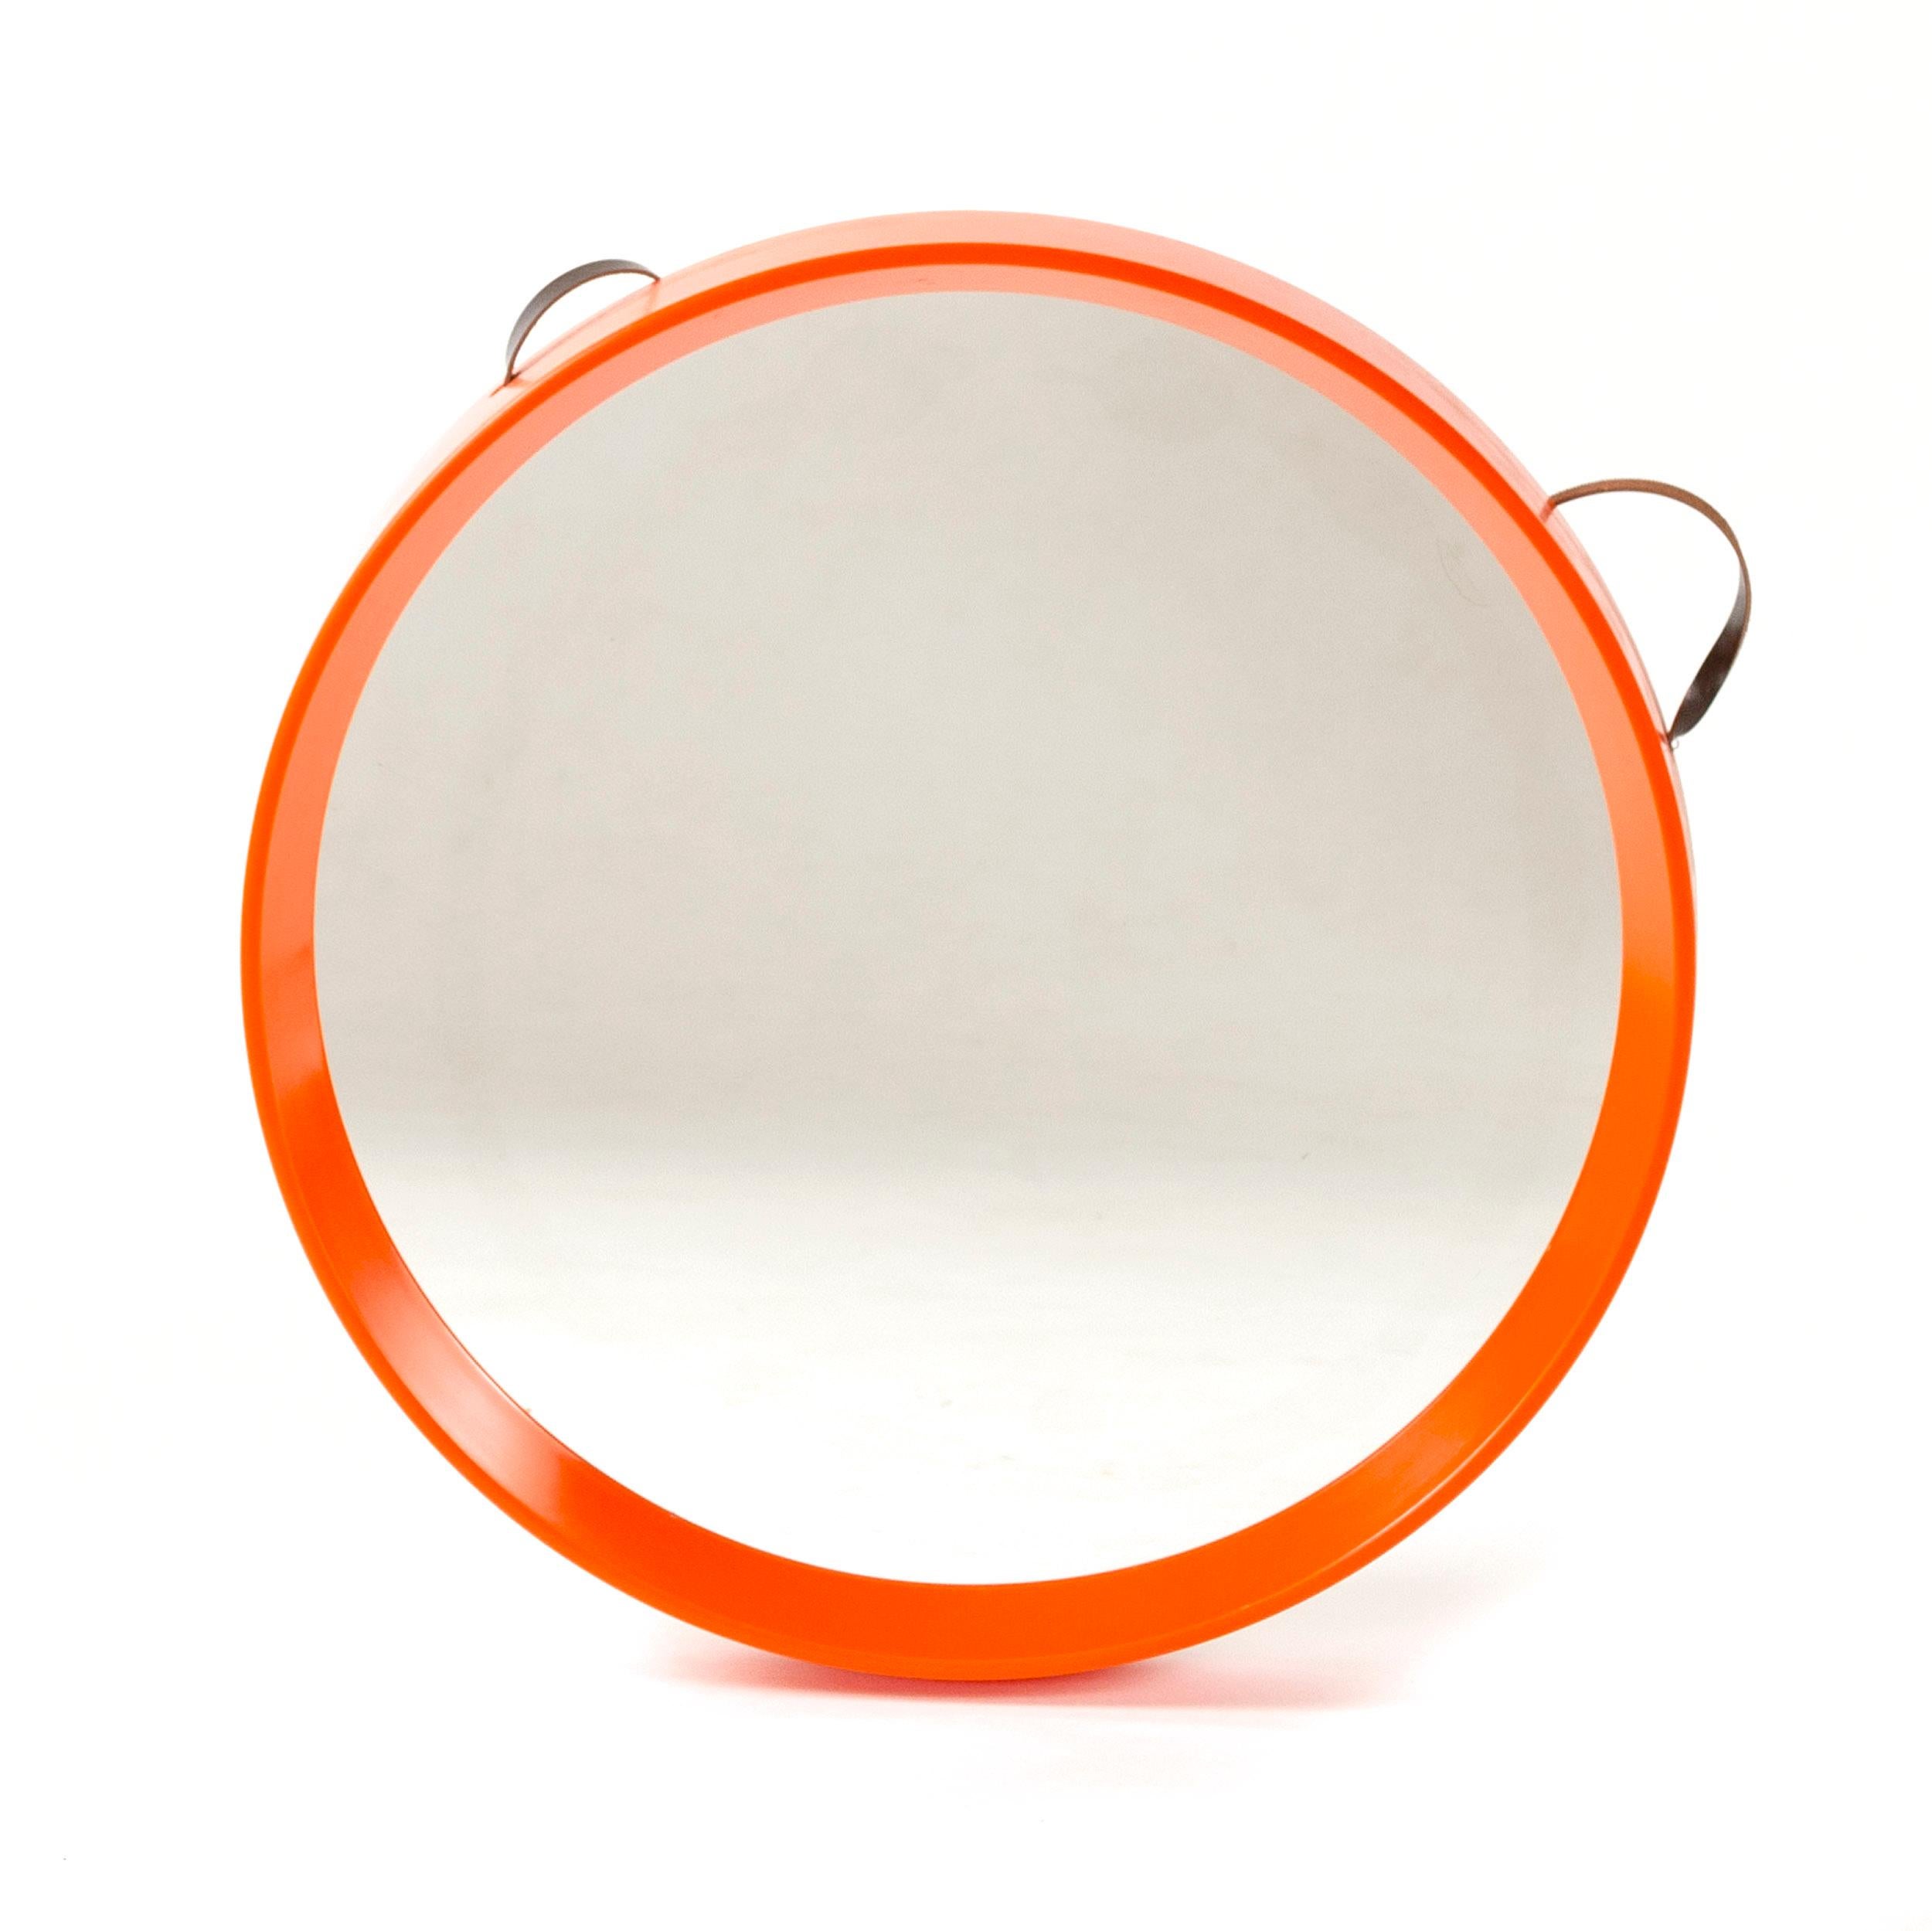 An orange, round tapered edge mirror which hangs from a thin leather strap.